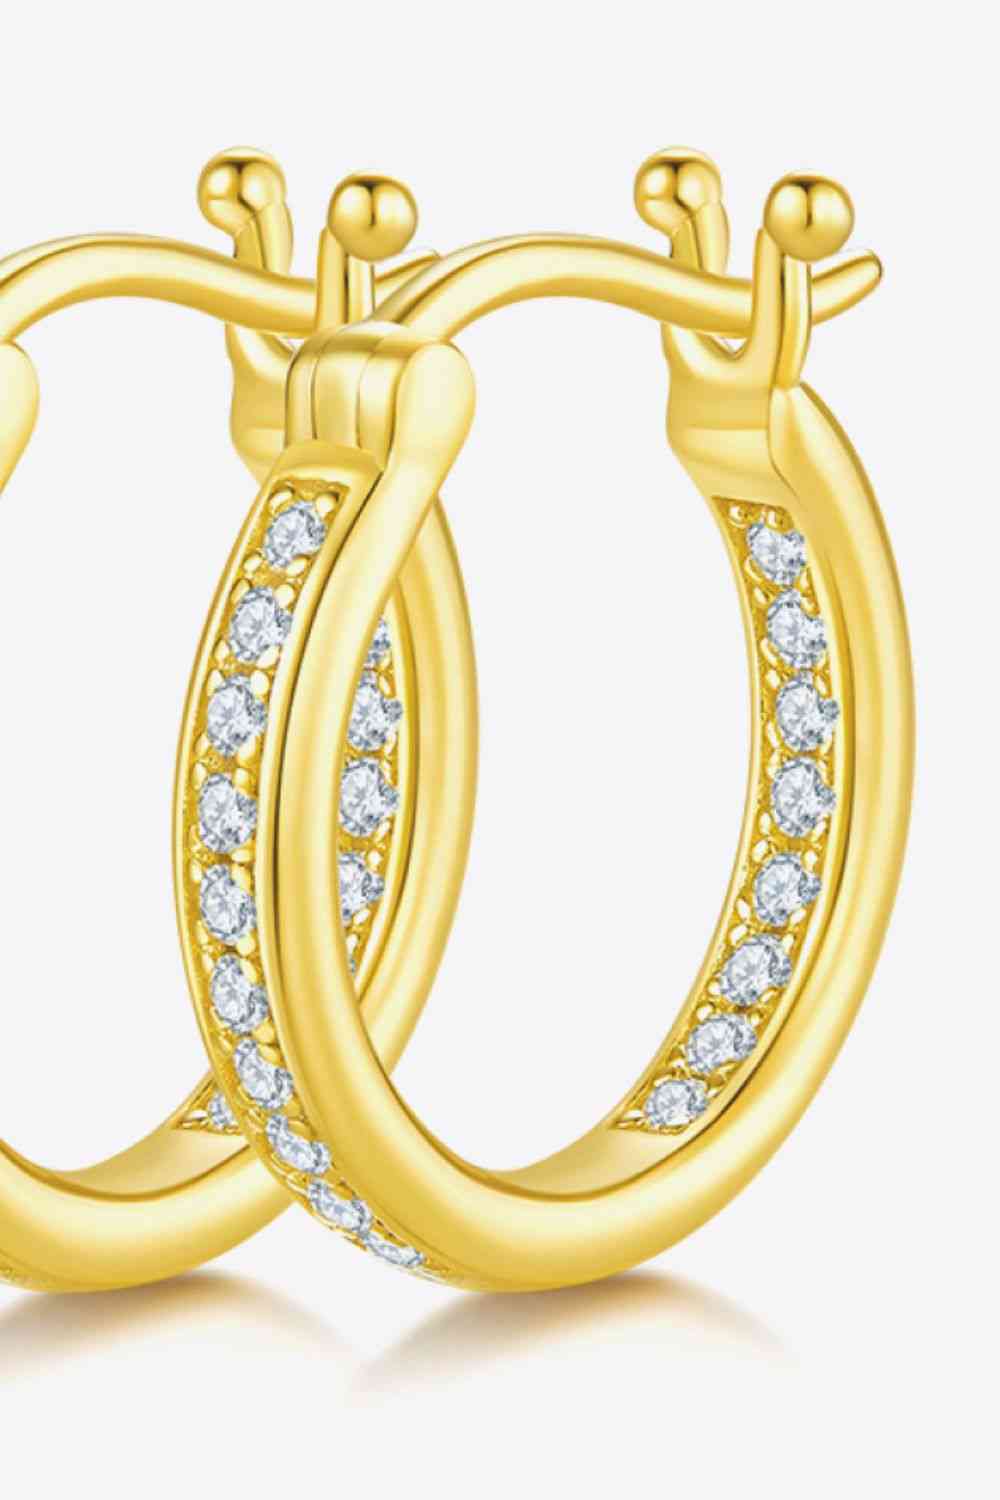 MOISSANITE ENCRUSTED SMALL HOOP EARRINGS Plated in Gold, Rose Gold or Platinum Plated